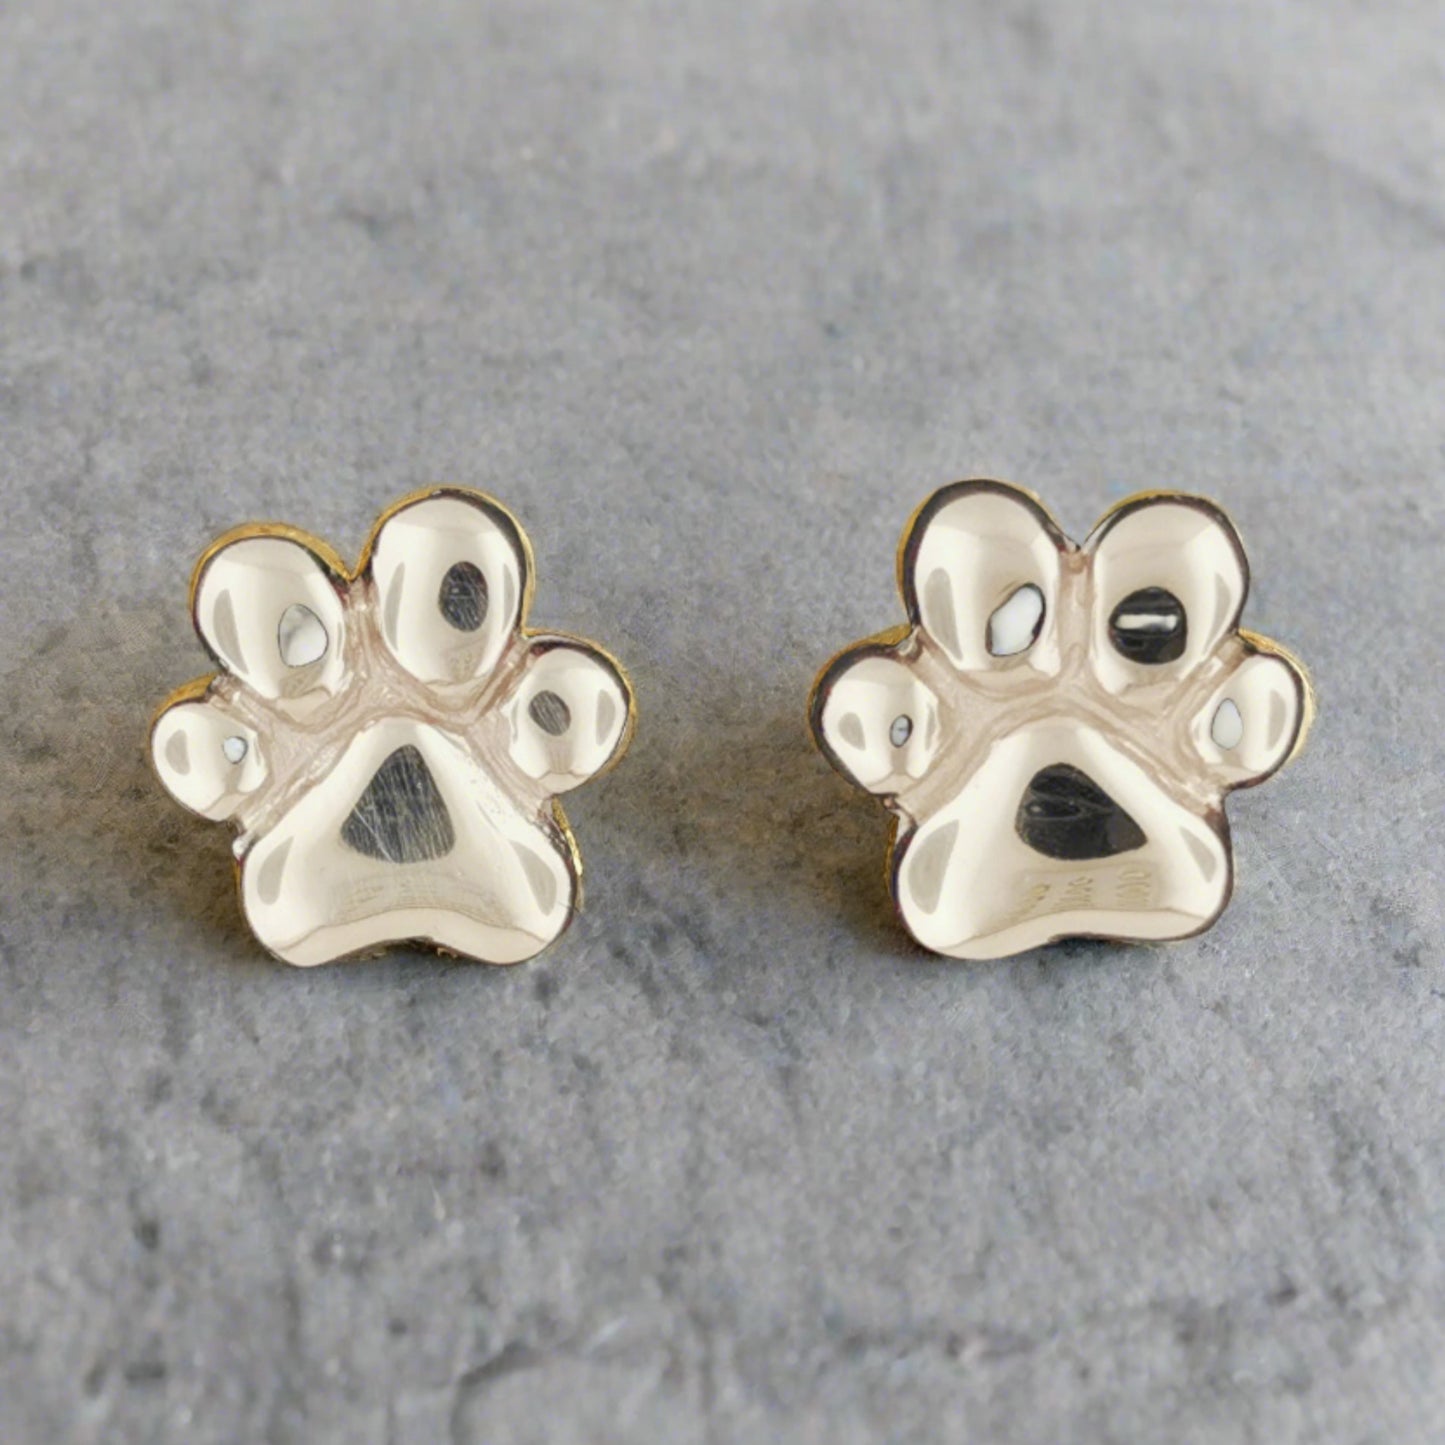 Gold Paw Print Stud Earrings Made To Order, Cat Paw Print Earrings, Cat Paw Earrings, Dog Paw Print Earrings, Gold Dog Paw Earrings, Gold Cat Paw Earrings, Gold Cat Paw Print Earrings, Gold Paw Print Jewelry, Gold Paw Print Earrings